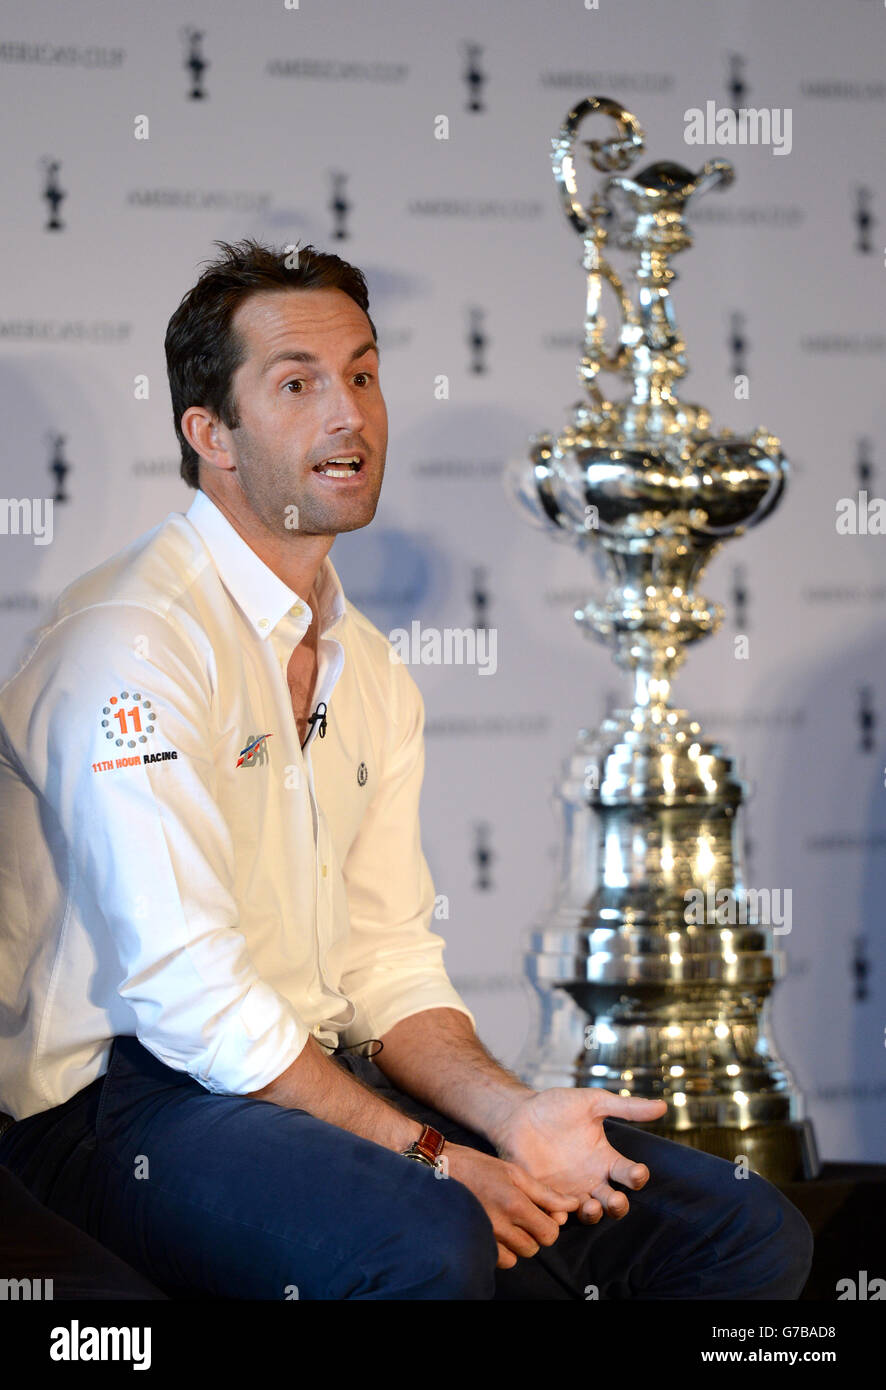 Skipper of Ben Ainslie Racing, Sir Ben Ainslie during a press conference for the America's Cup at the St Pancras Renaissance Hotel, London. Stock Photo